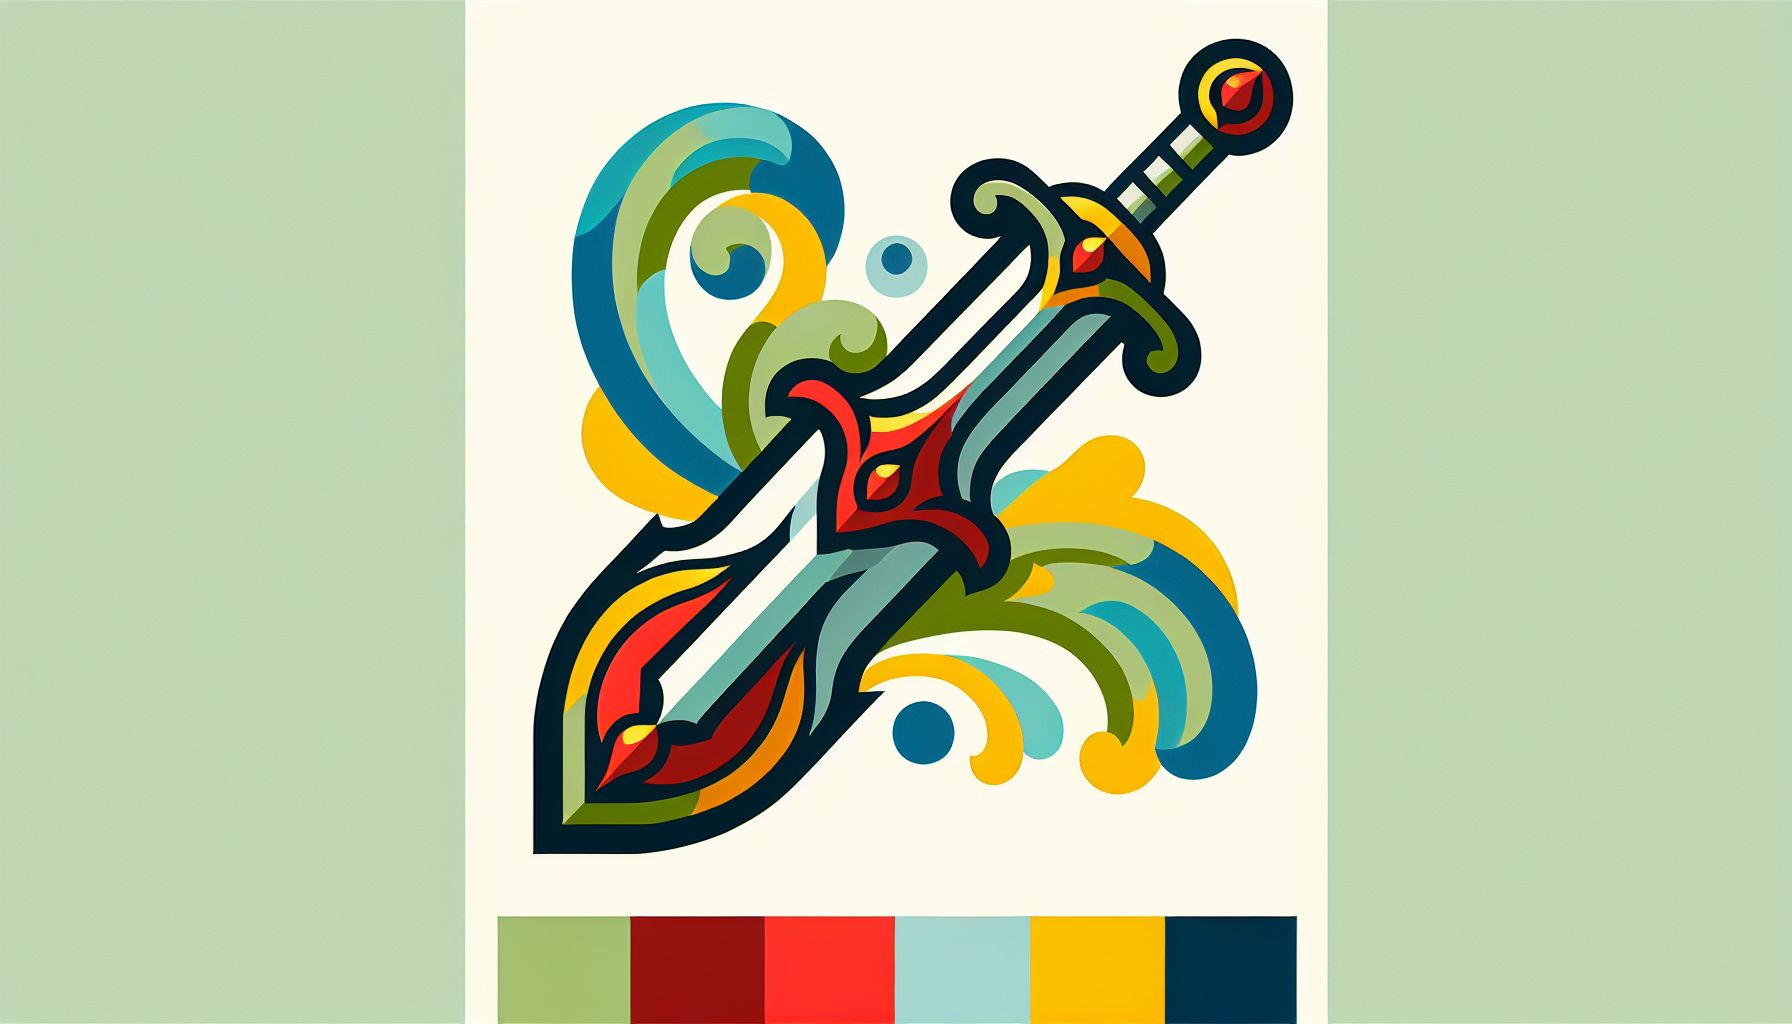 Sword in flat illustration style and white background, red #f47574, green #88c7a8, yellow #fcc44b, and blue #645bc8 colors.